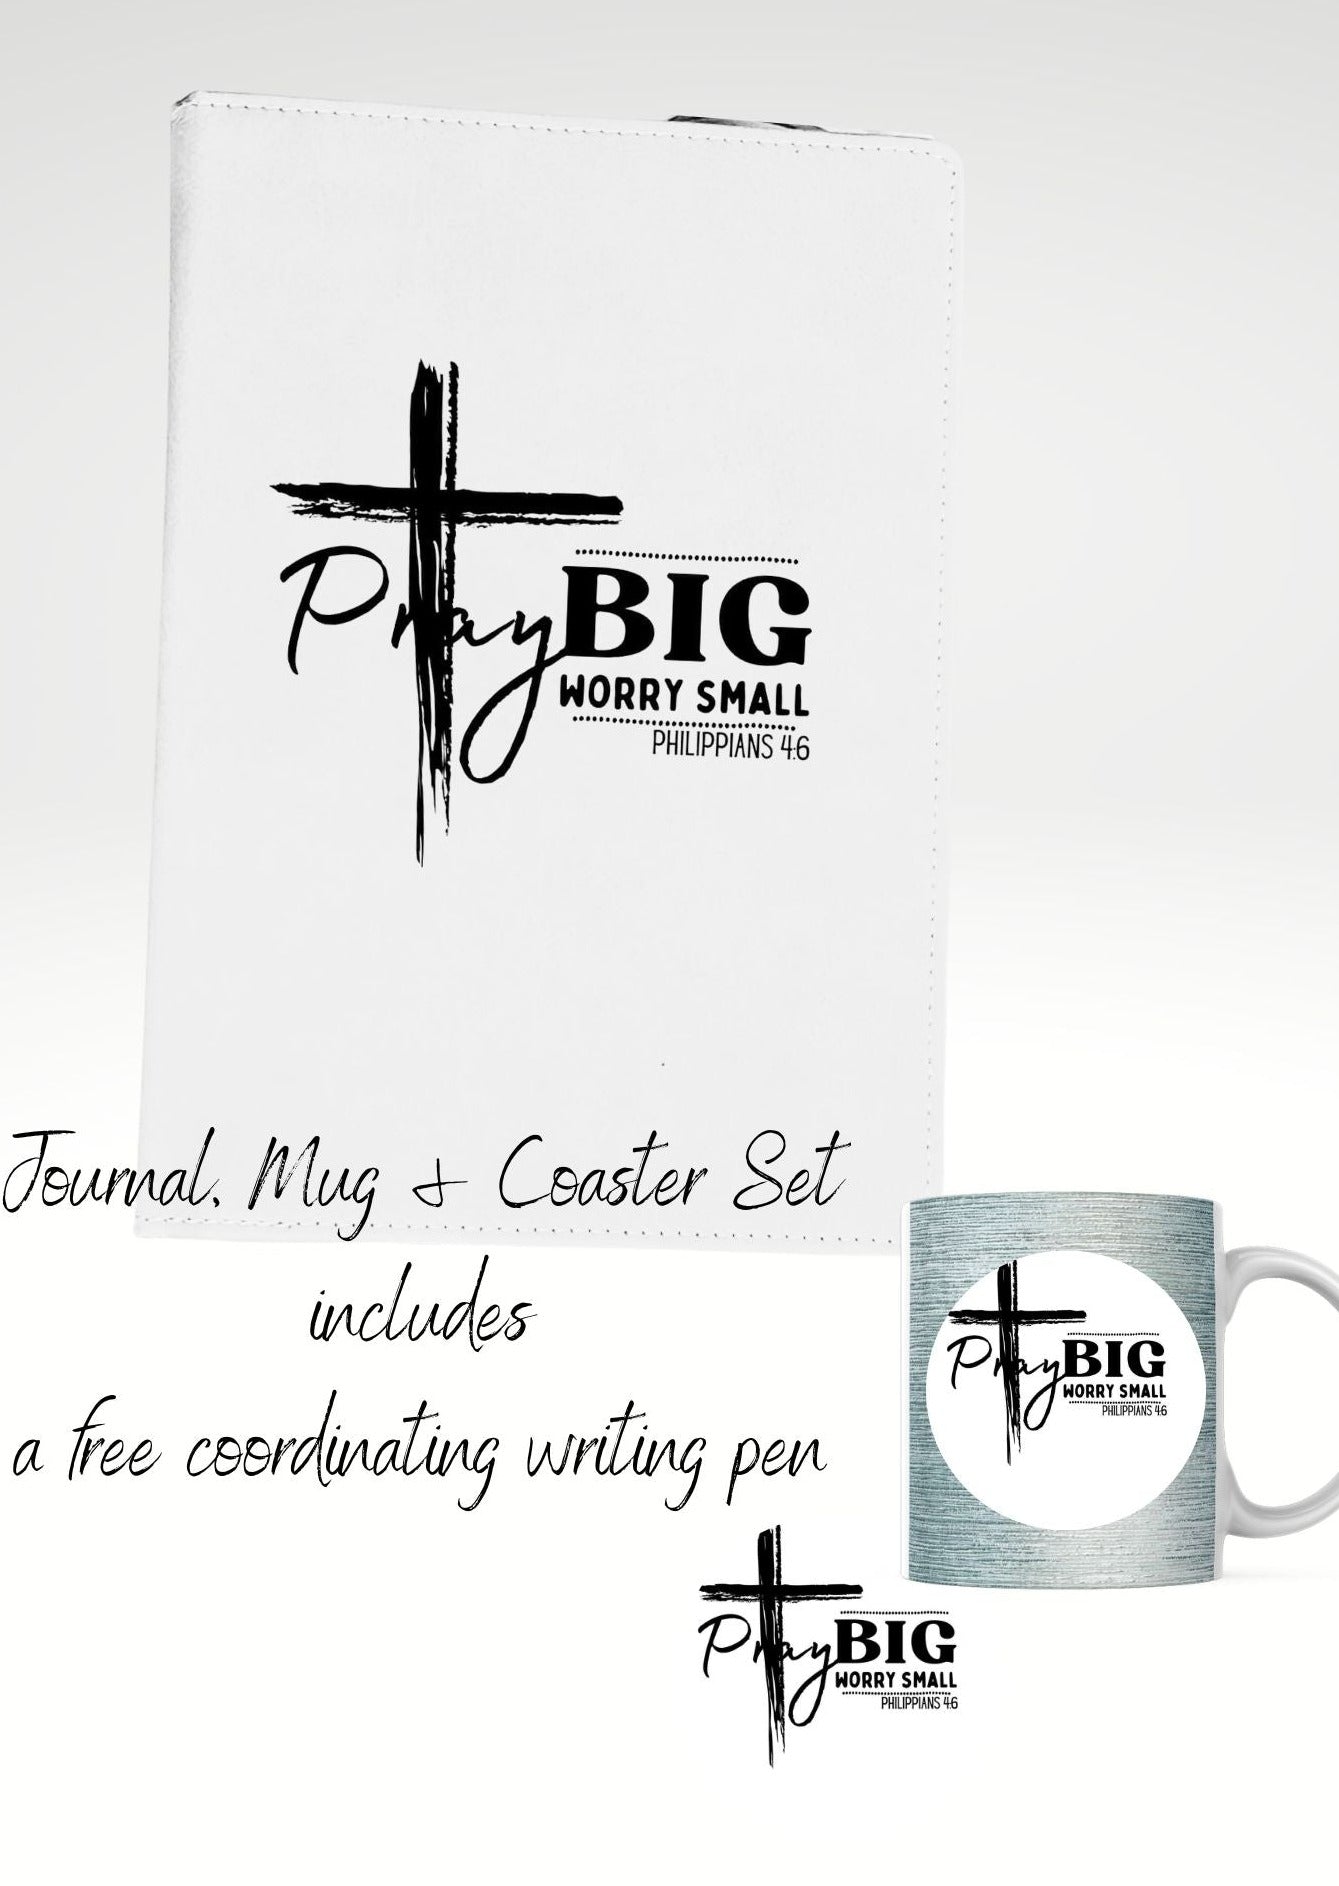 A journal of 100 lined pages with a matching mug and coaster.